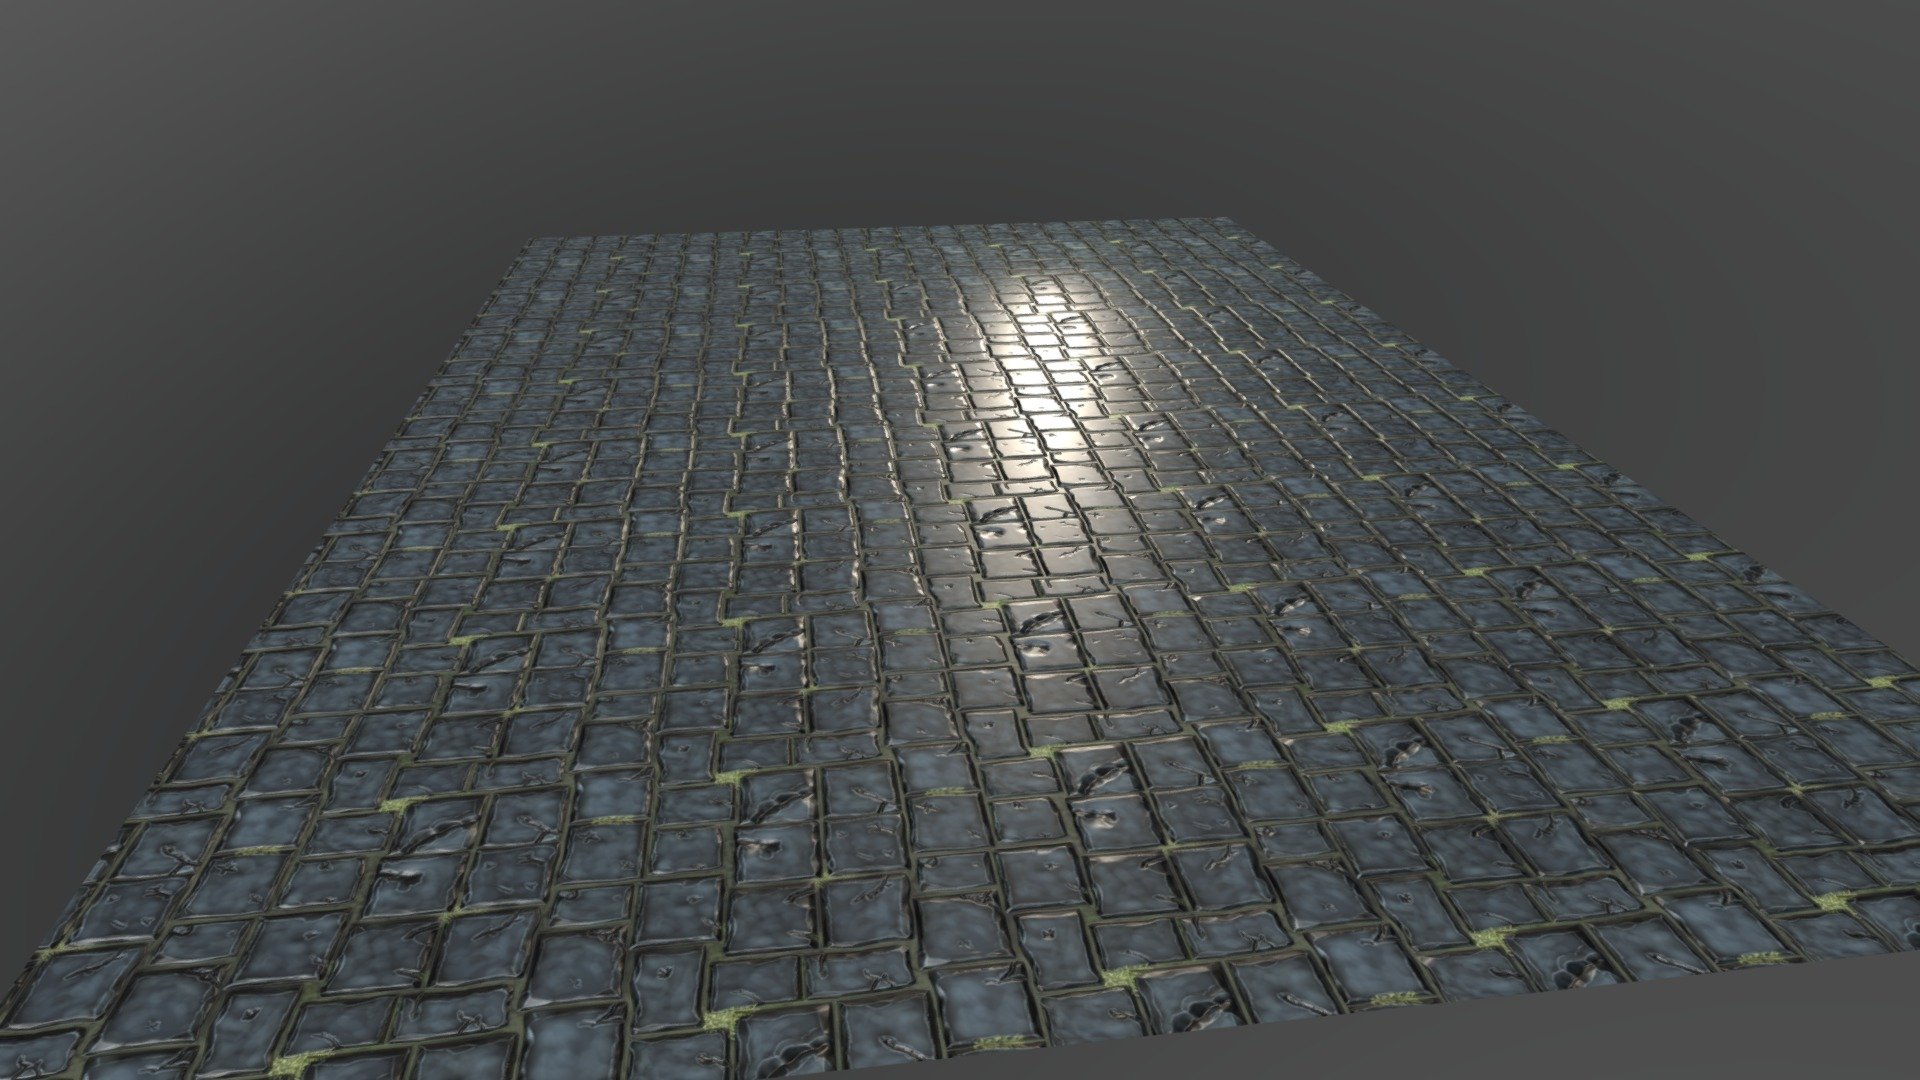 4x4 Low poly Floor with tillable textures and normals.

made in blender sculpt and handpainted 3d model